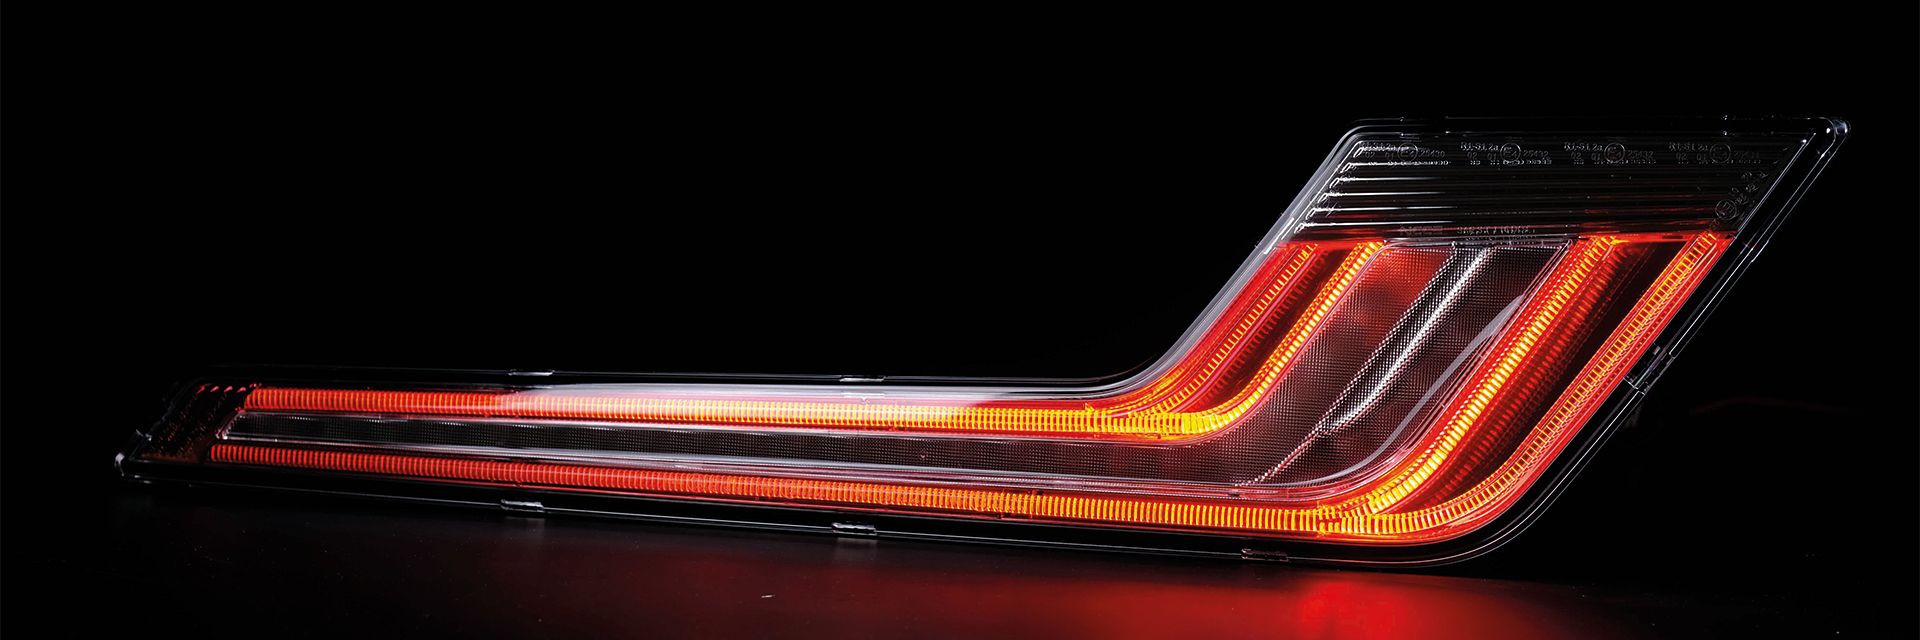 Full-LED Tail Light with Dynamic Indicator